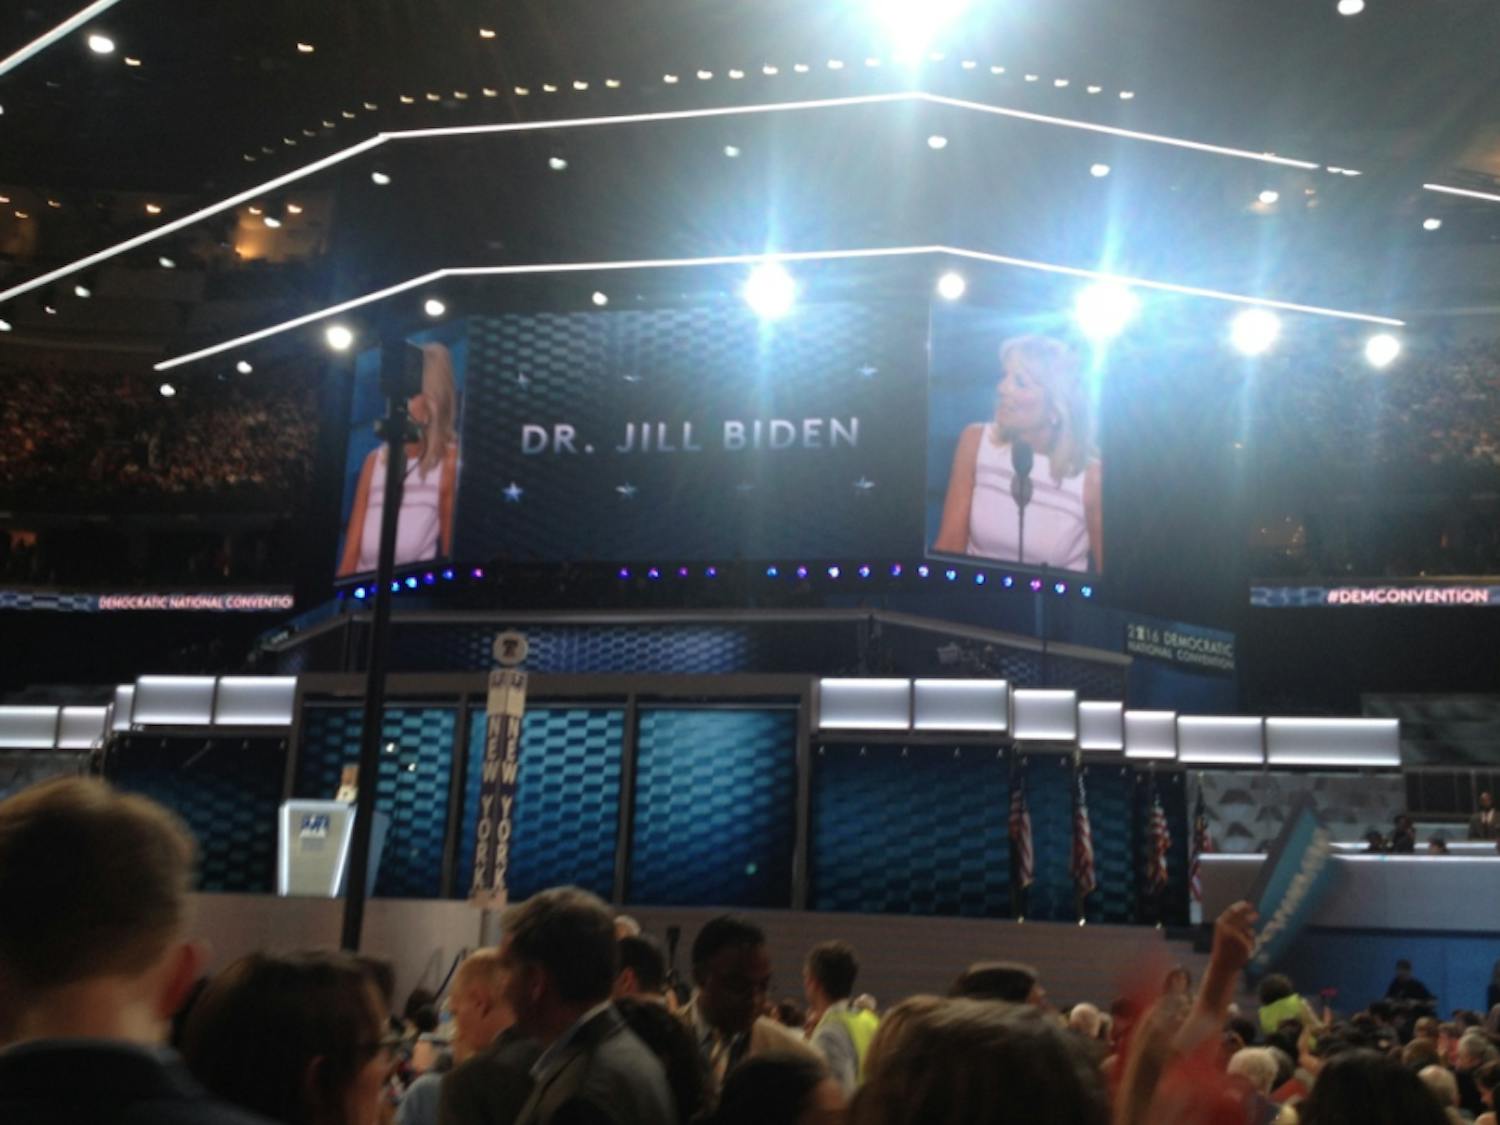 Jill Biden, second lady of the United States, introduces her husband Vice President Joe Biden at the Democratic National Convention in Philadelphia on July 27, 2016.